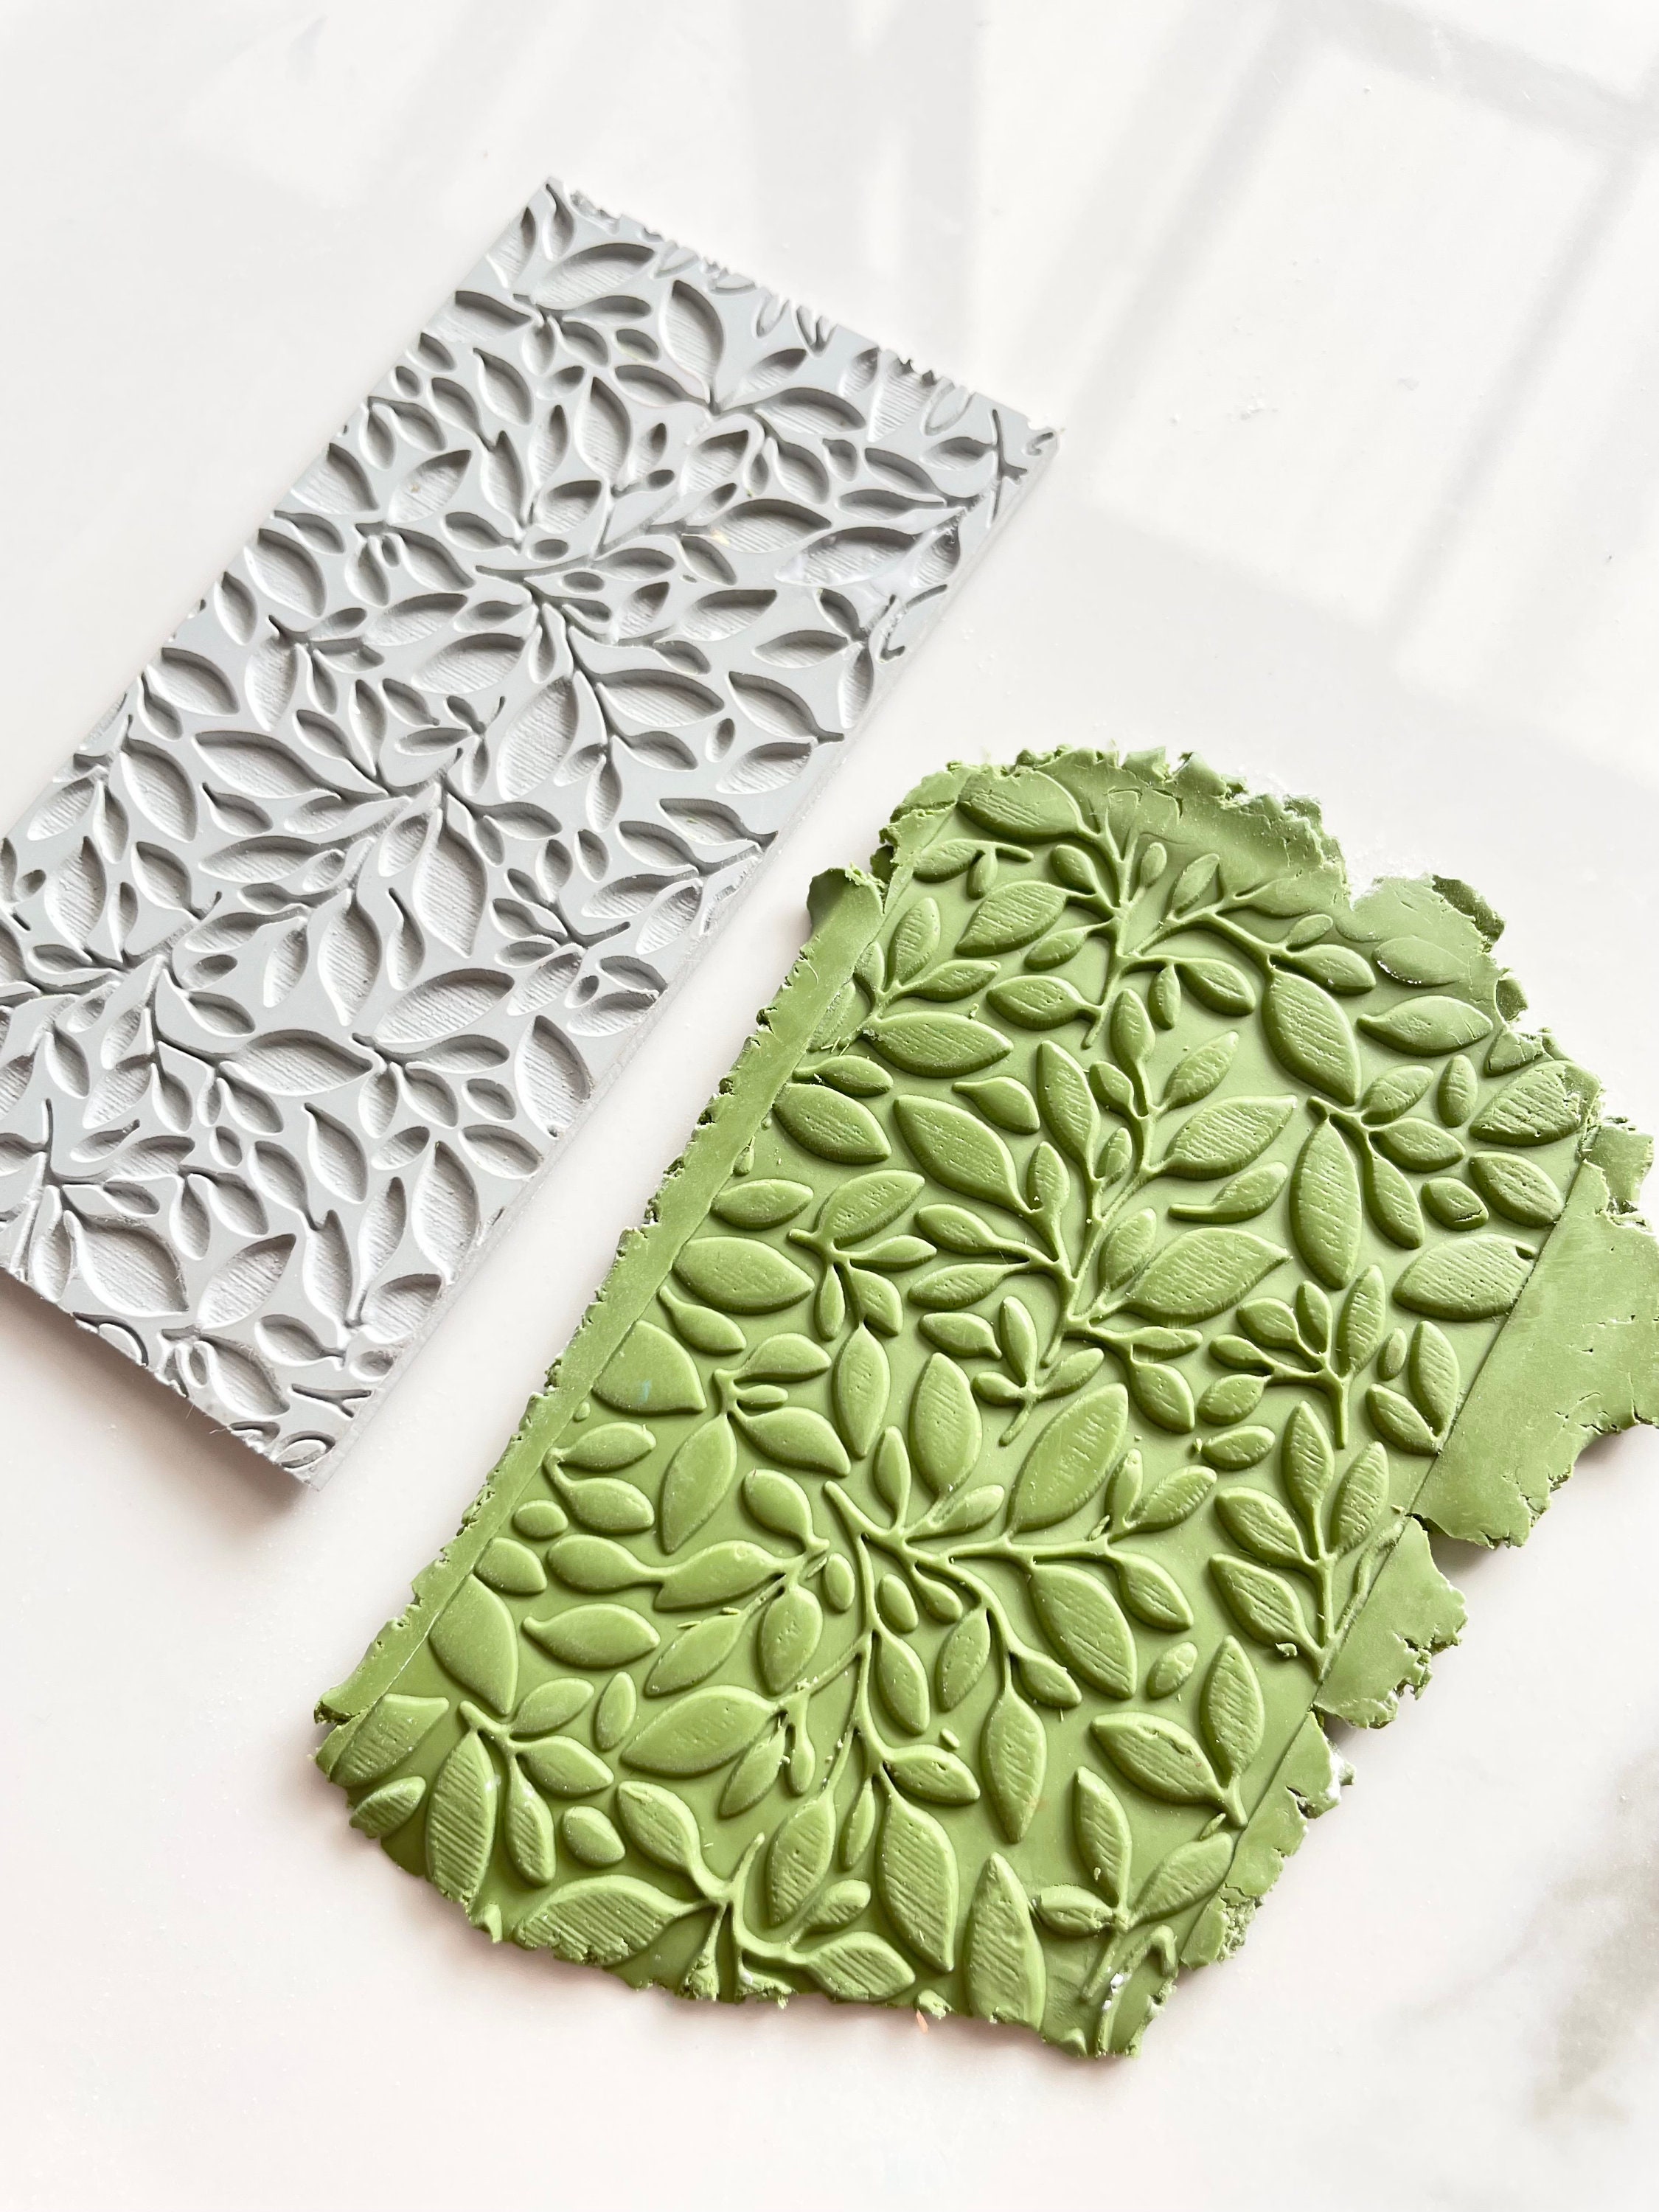 Polymer Clay Texture Mat Full Leaves Standard Size Impression Sheet  Botanical Pattern Metalclay Ceramic Clay Earrings FULL LEAVES MAT 